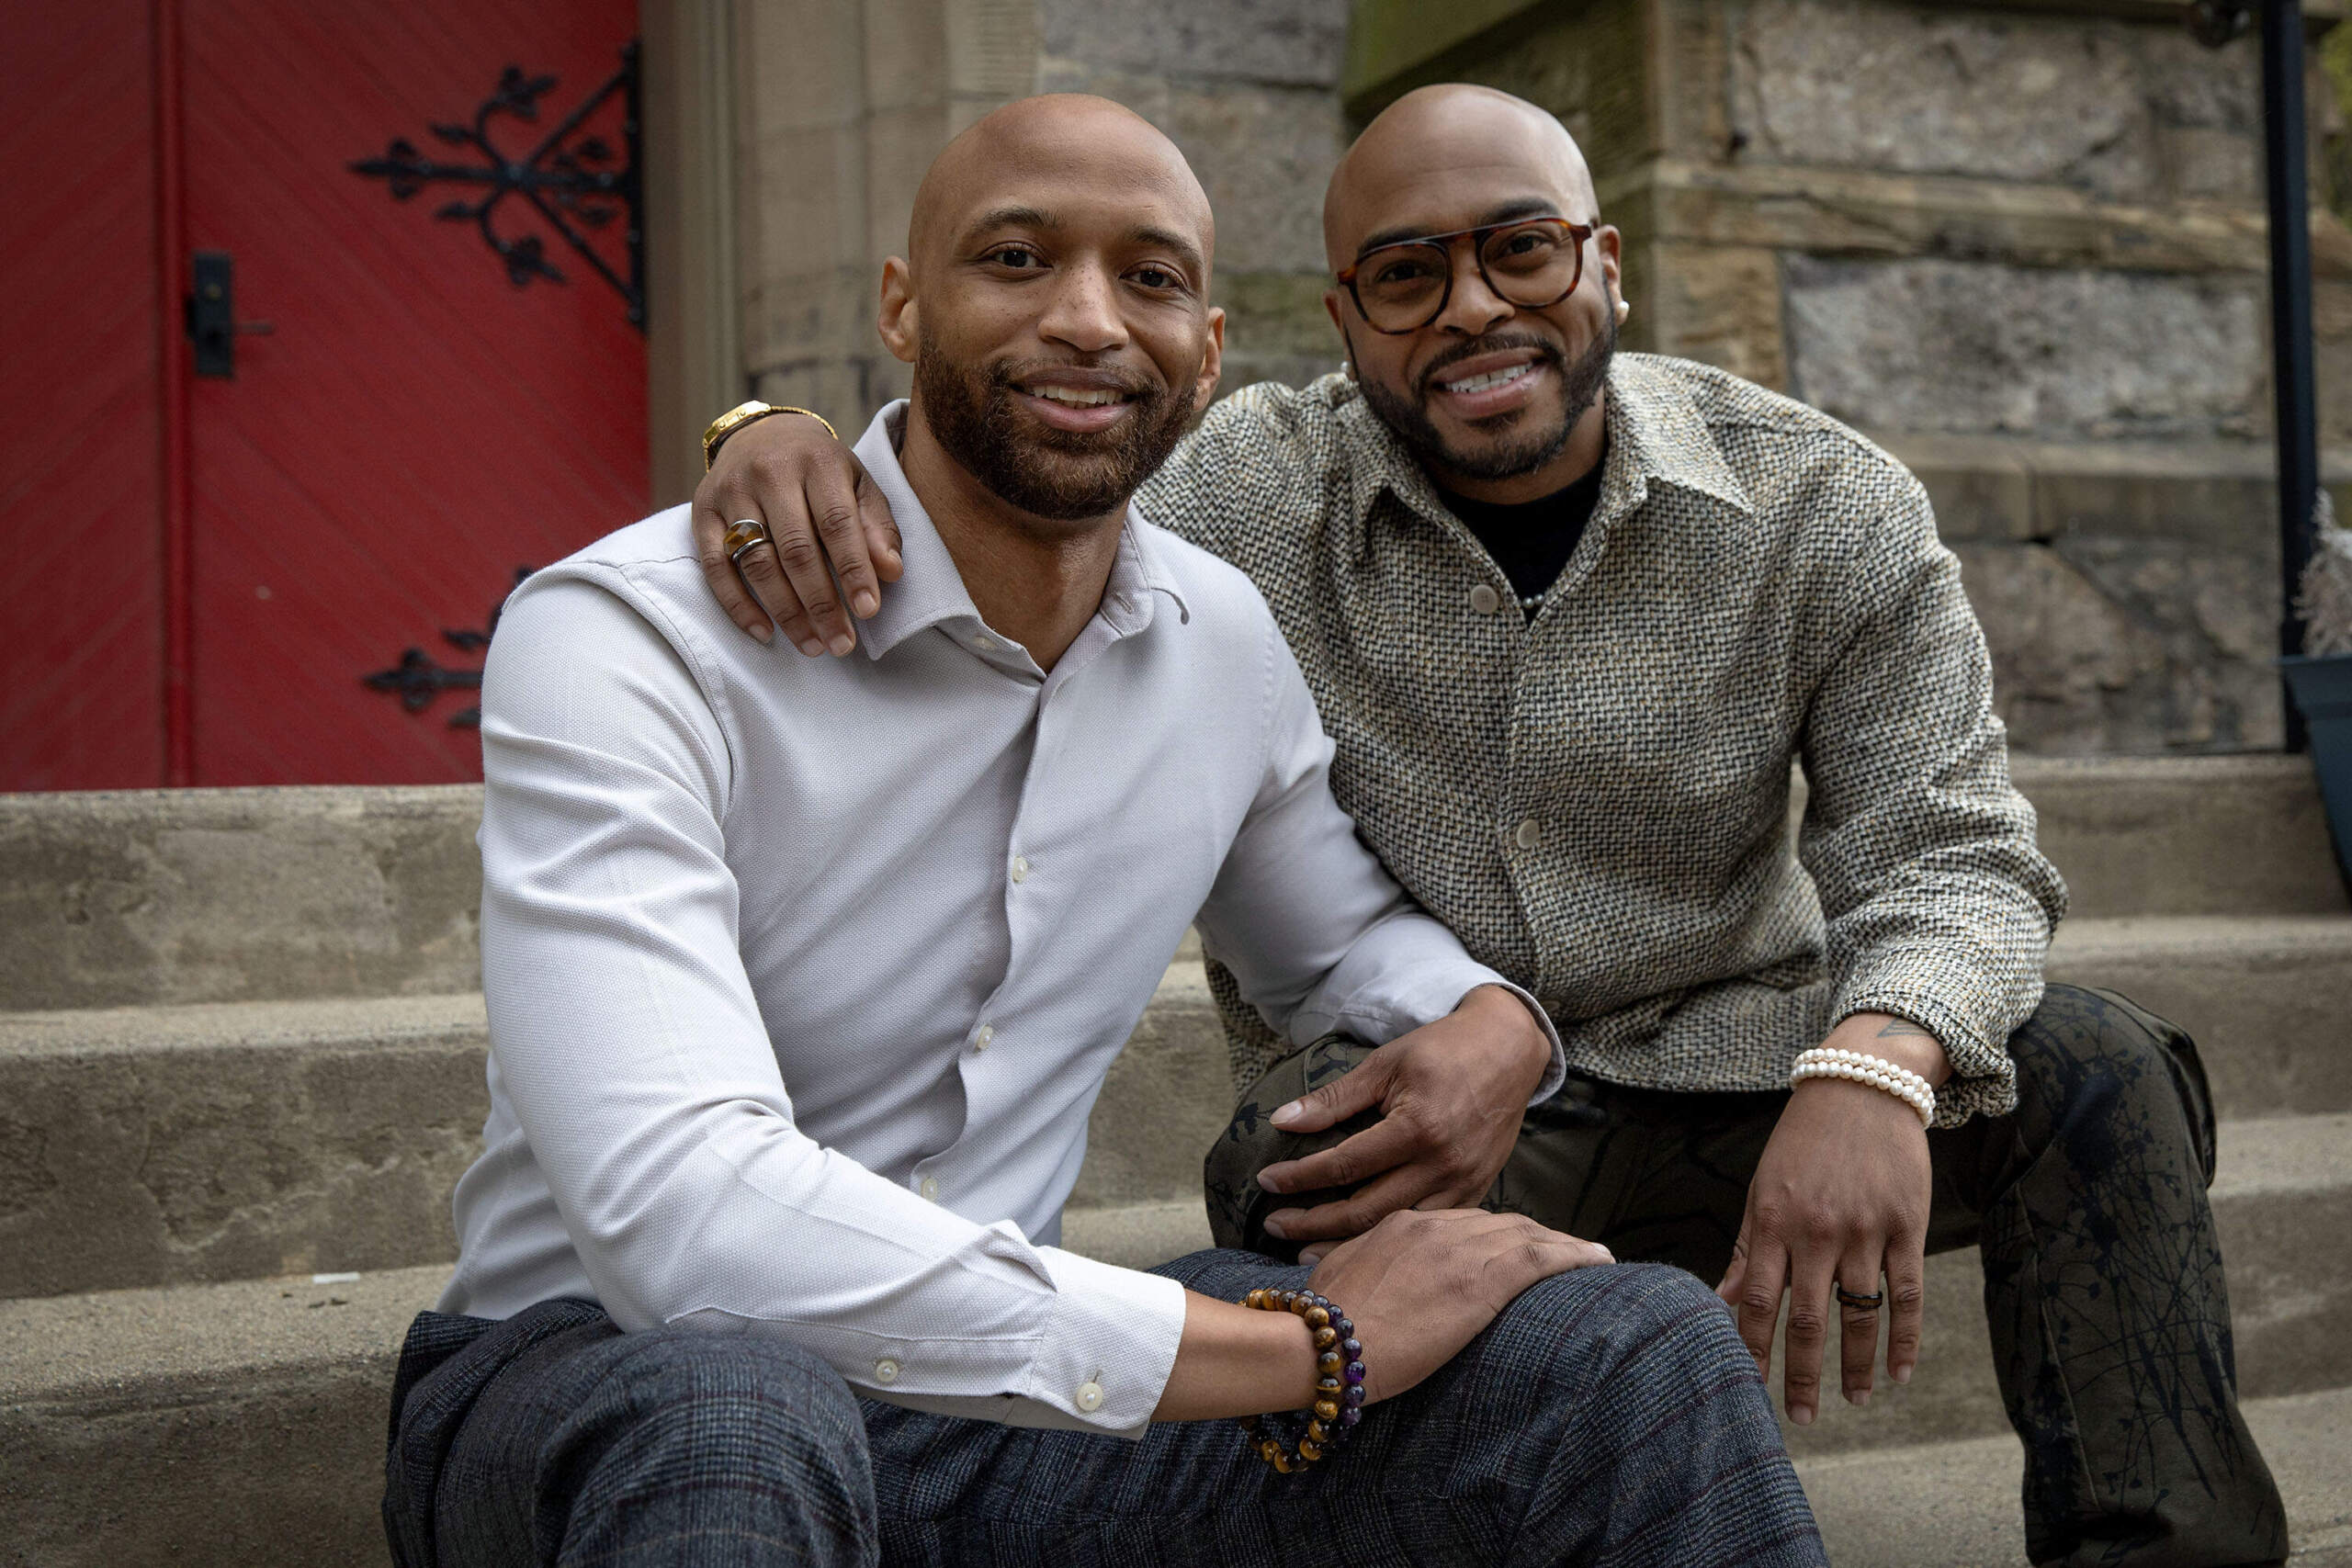 Corey Yarbrough and Quincey J. Roberts Sr. at Union United Methodist Church, where they were married, in Boston's South End. (Robin Lubbock/WBUR)